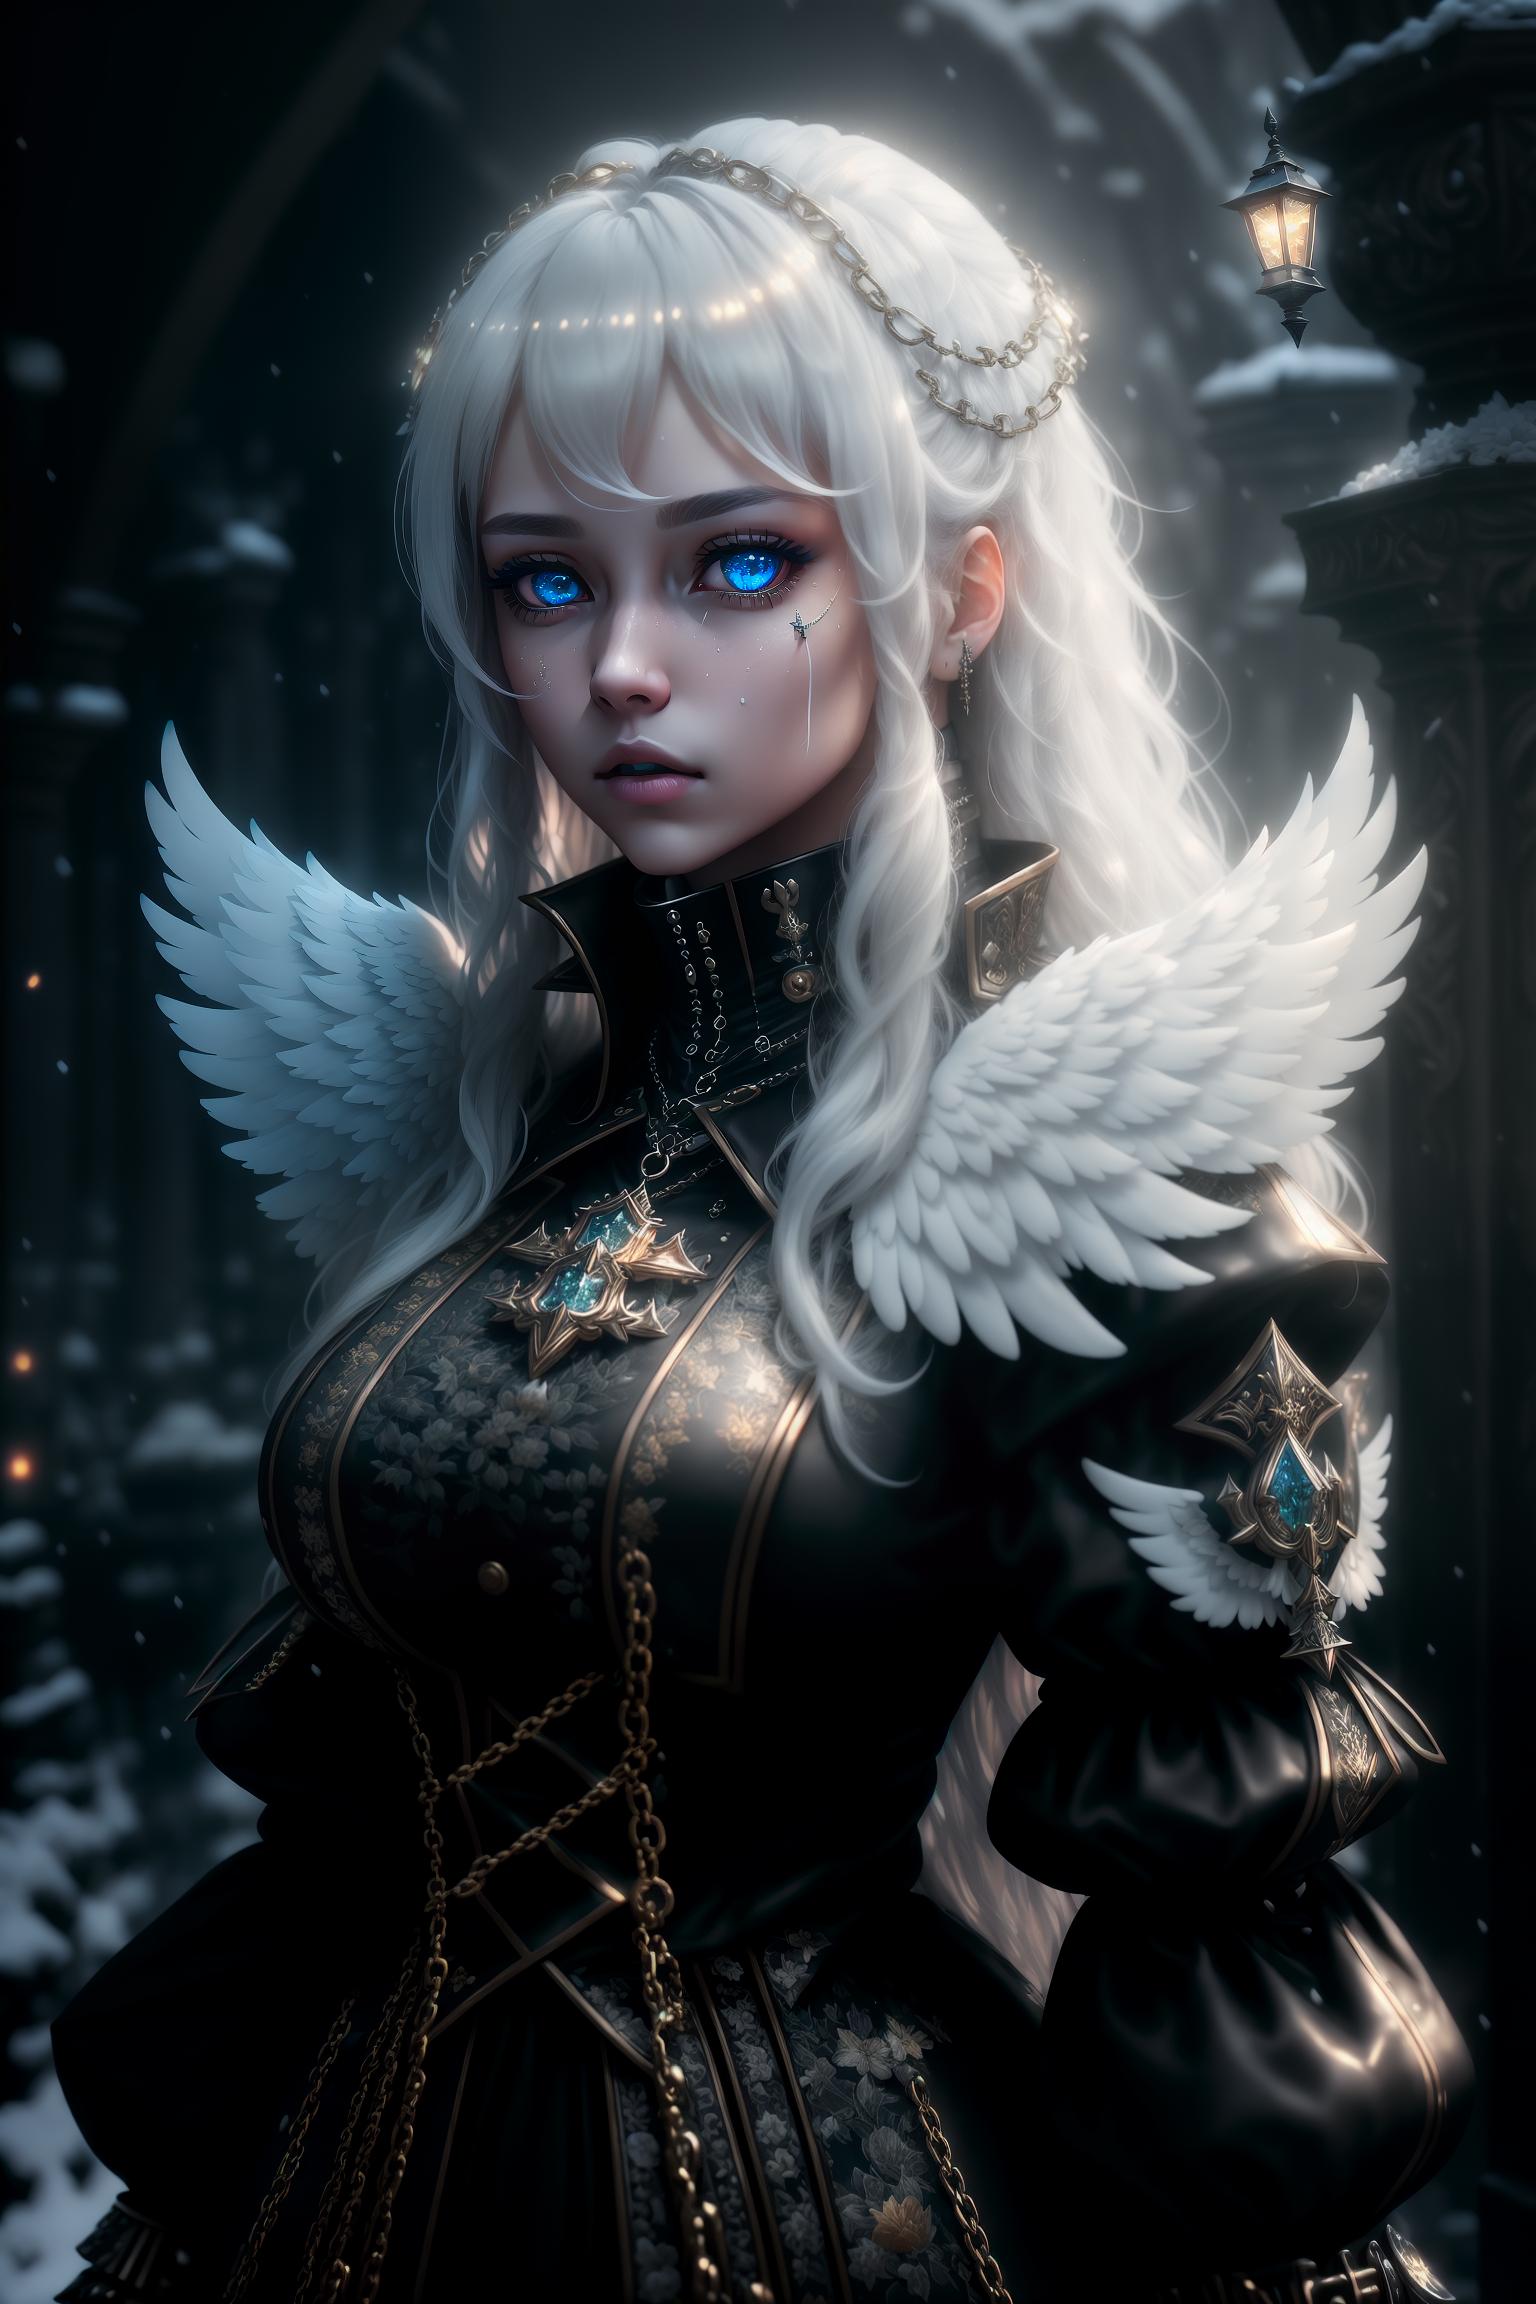  (masterpiece:1.5),(bestquality),highlydetailed,ultra detailed,cold,solo,(1girl),(detailedeyes),(shinegoldeneyes),(longliverhair),expressionless,(long sleeves),(puffy sleeves),(white wings),shinehalo,(heavymetal:1.2),(metaljewelry),cross lacedfootwear (chain),(Whitedoves:1.2),lonelygravedigger:1.5,tiredandaged:1.3,shovel,skull,shabbyclothing,lonelygraveyard:1.5,newlyduggrave:1.2,nightenvironment:1.2,gravestonesandstatues,heavyfogandsilence hyperrealistic, full body, detailed clothing, highly detailed, cinematic lighting, stunningly beautiful, intricate, sharp focus, f/1. 8, 85mm, (centered image composition), (professionally color graded), ((bright soft diffused light)), volumetric fog, trending on instagram, trending on tumblr, HDR 4K, 8K